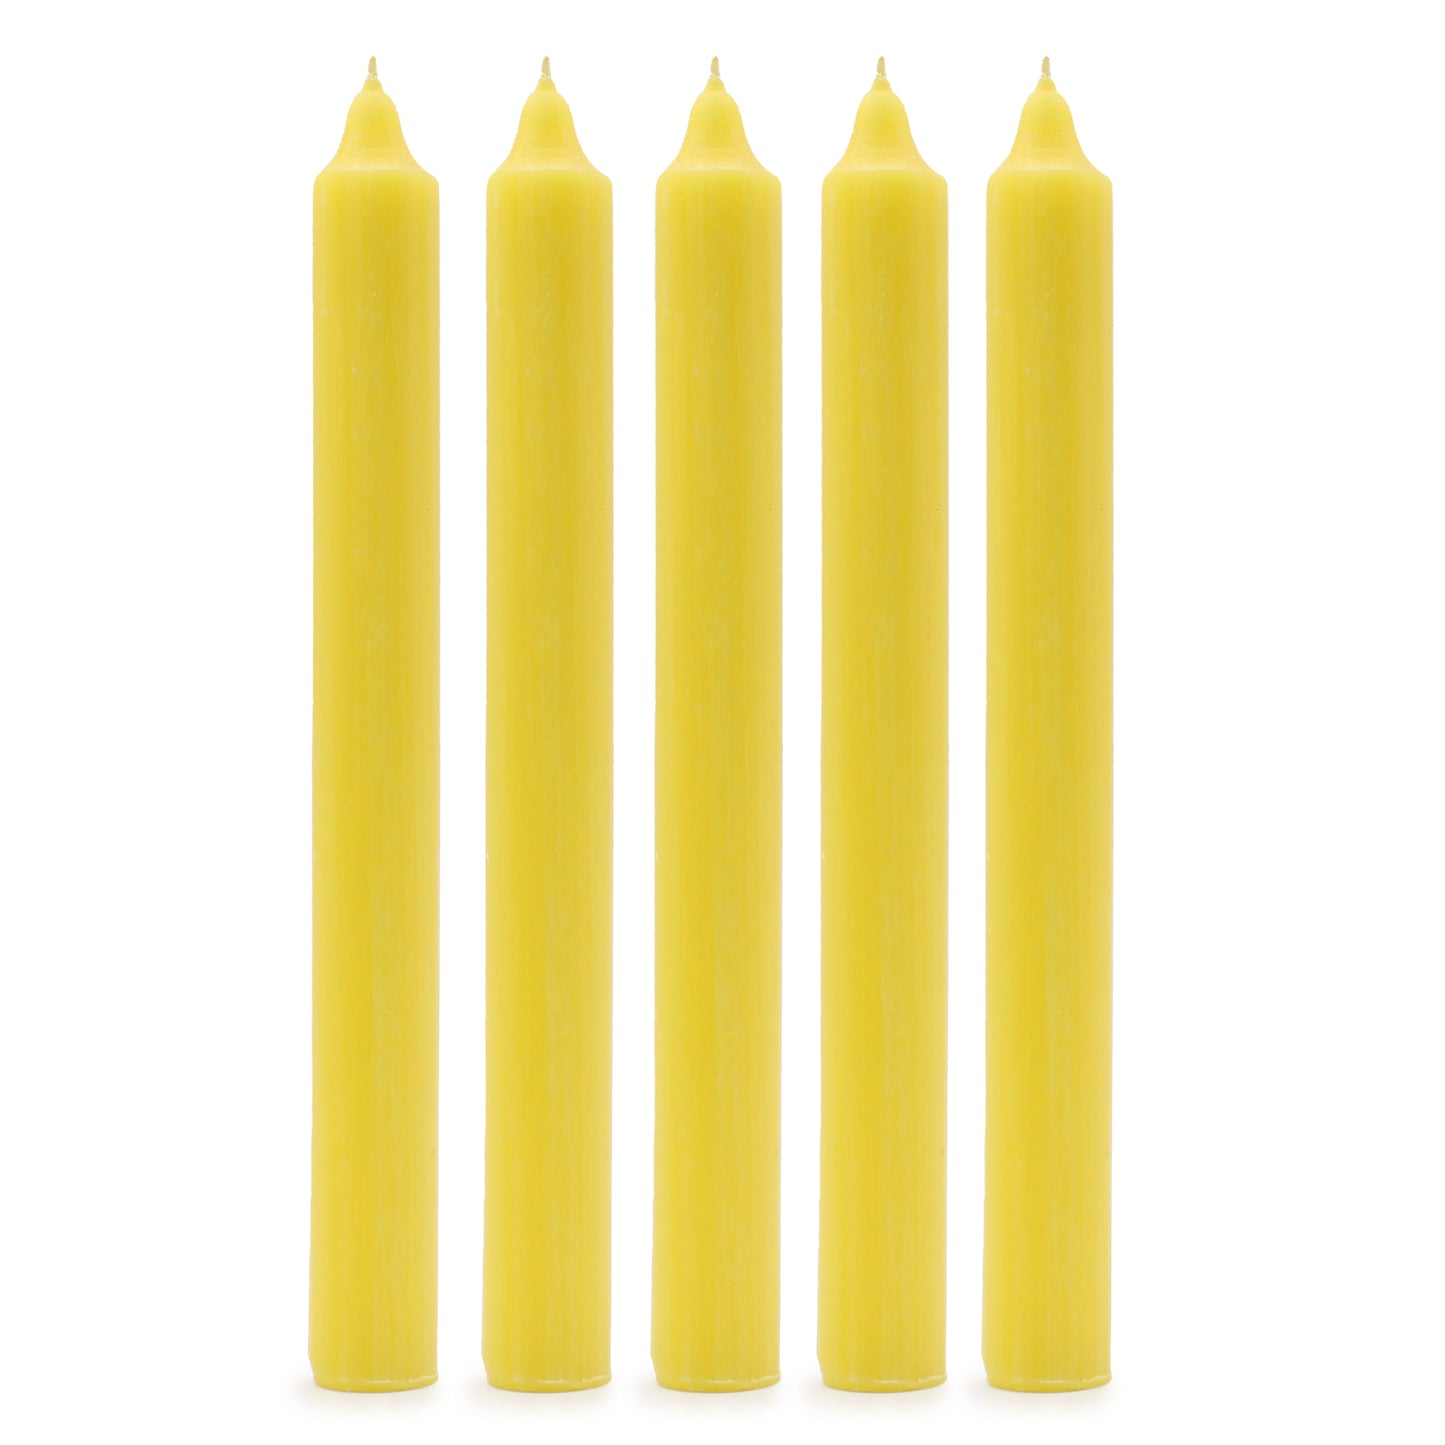 Solid Colour Dinner Candles - Rustic Lemon - Pack of 5